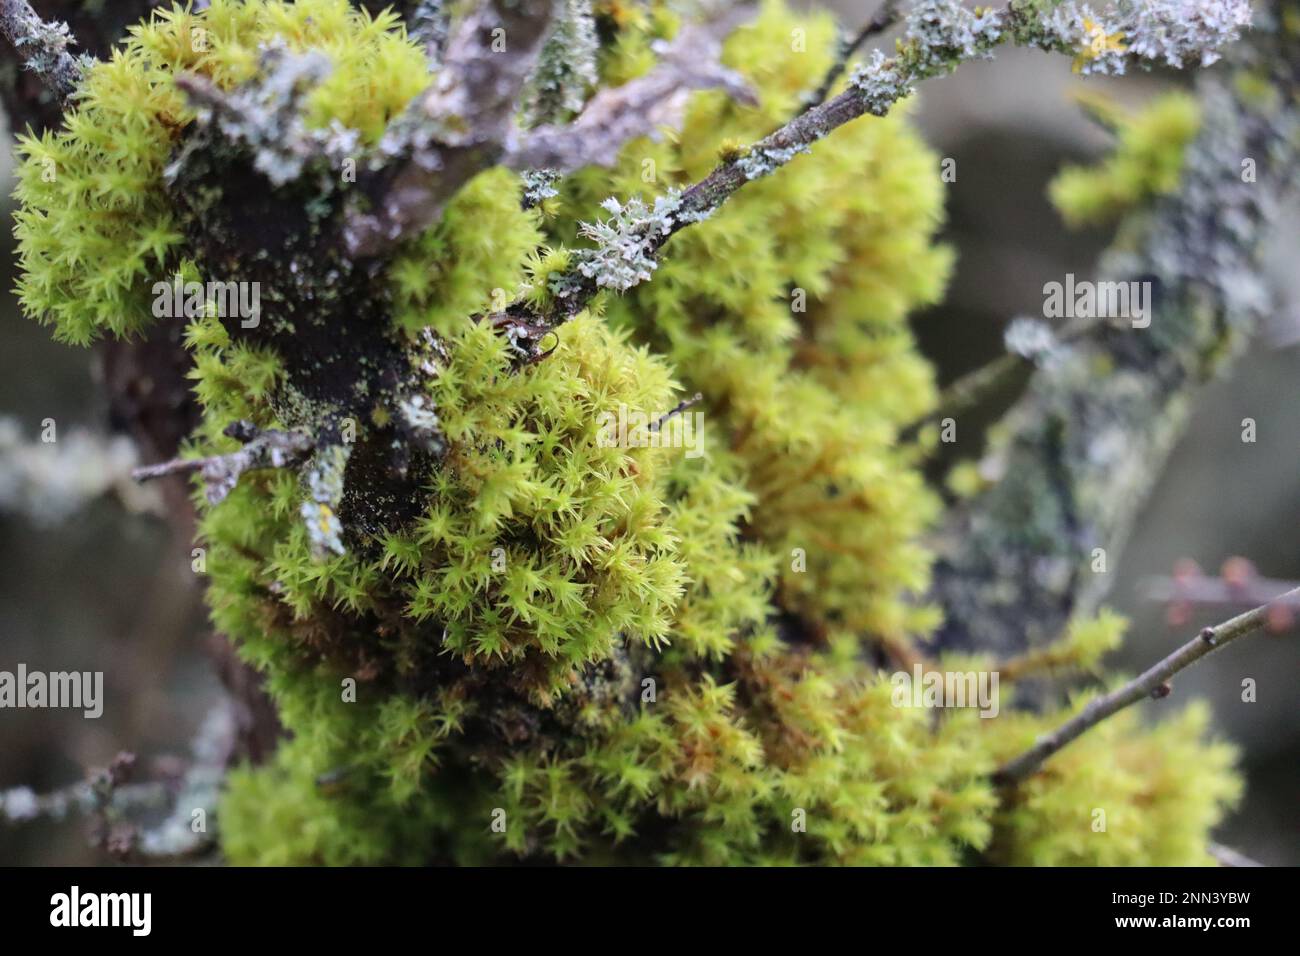 Star moss and Lichen in a moist Location Stock Photo